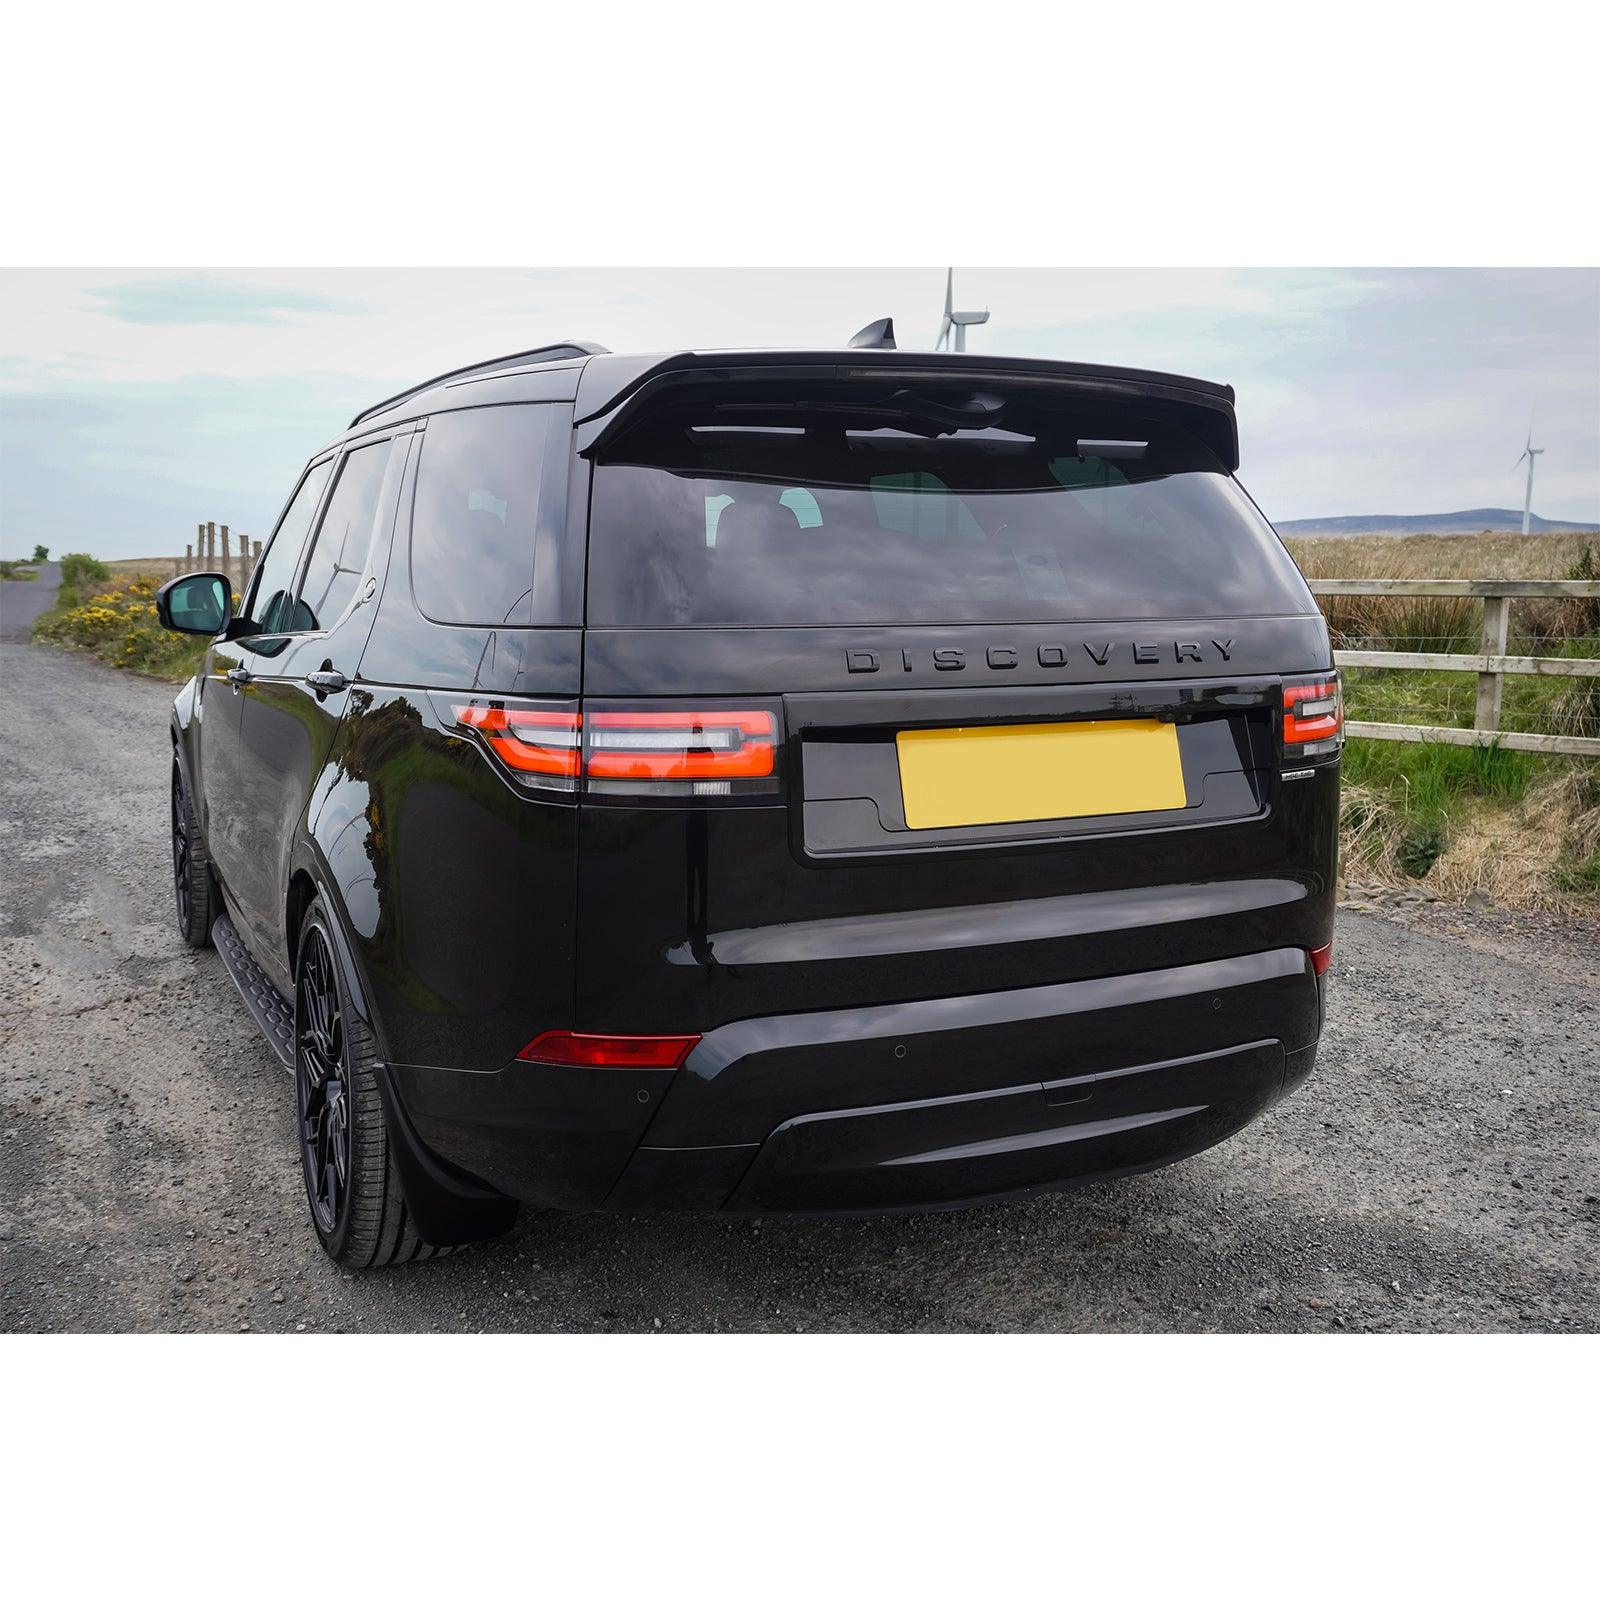 Land Rover Discovery 5 Number Plate Centralisation Kit - Gloss Black - RisperStyling